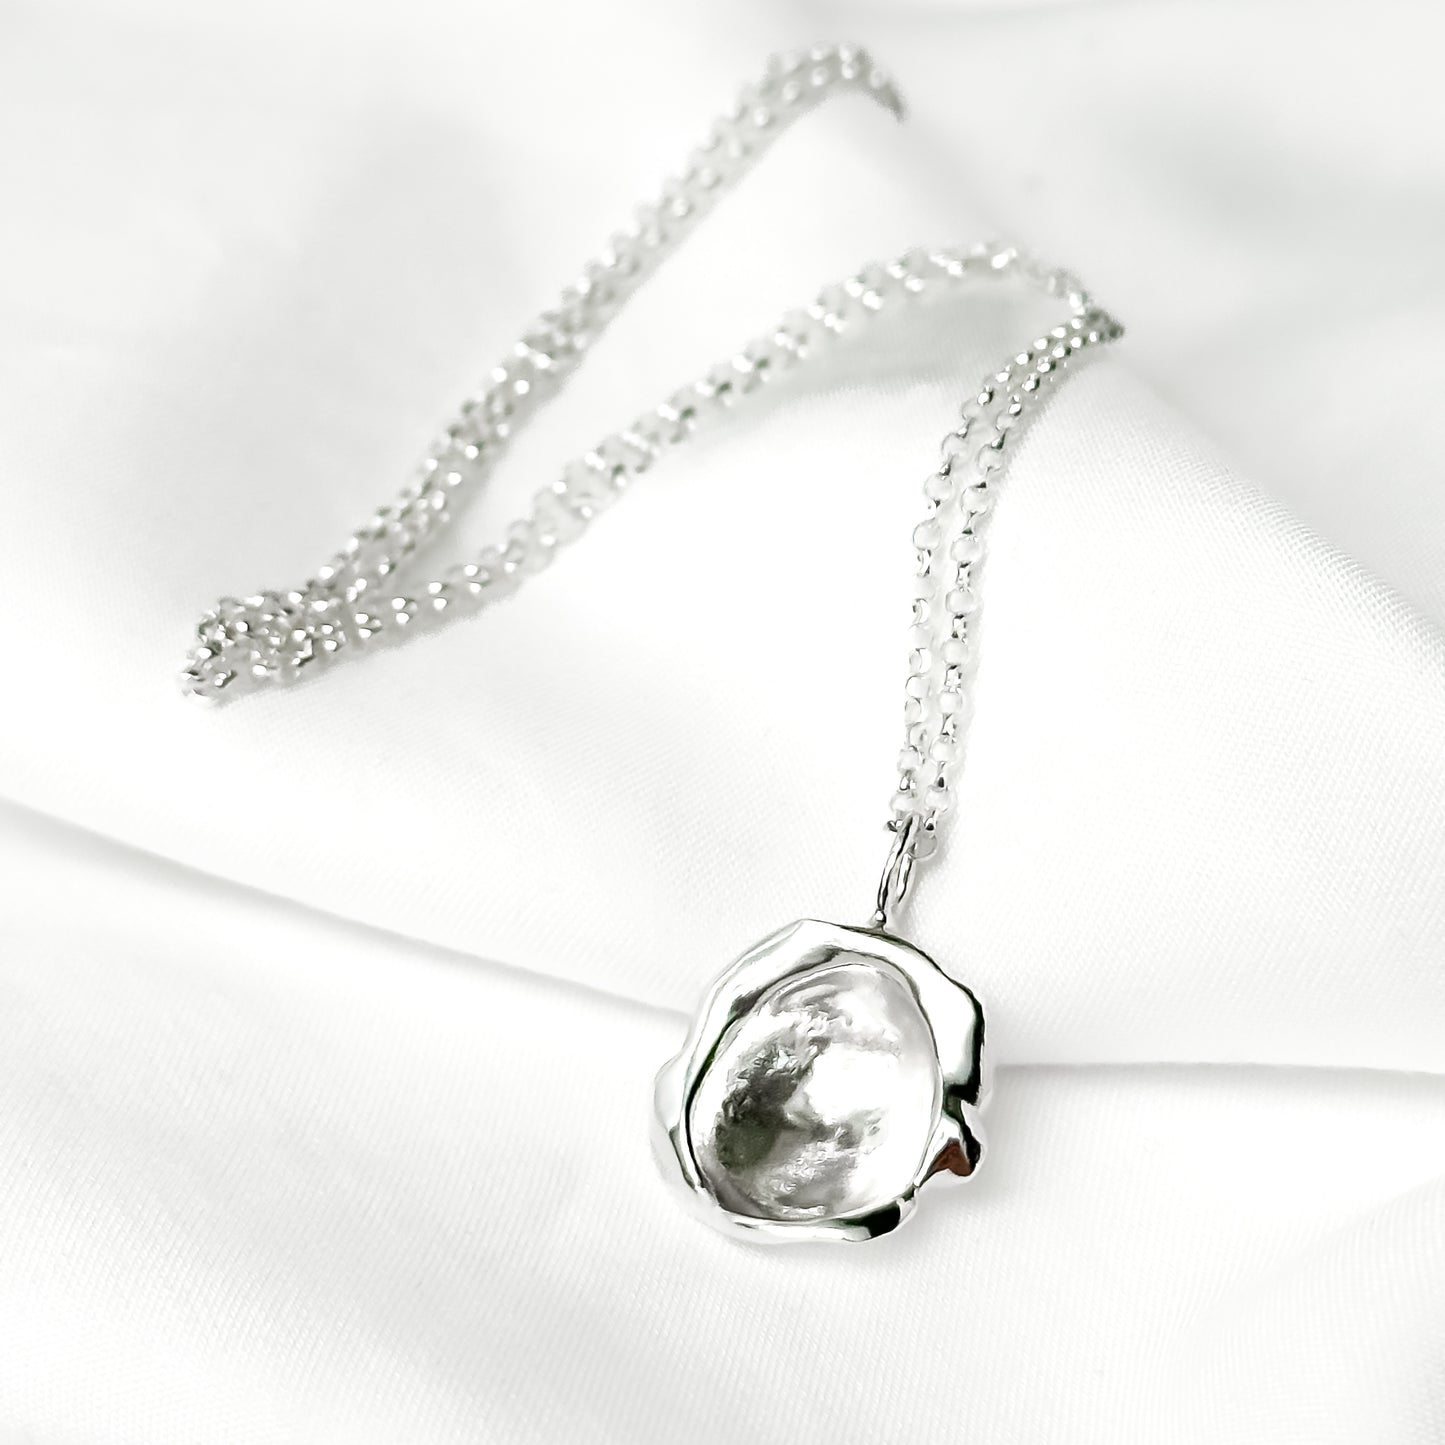 Sterling Silver Droplet Necklace